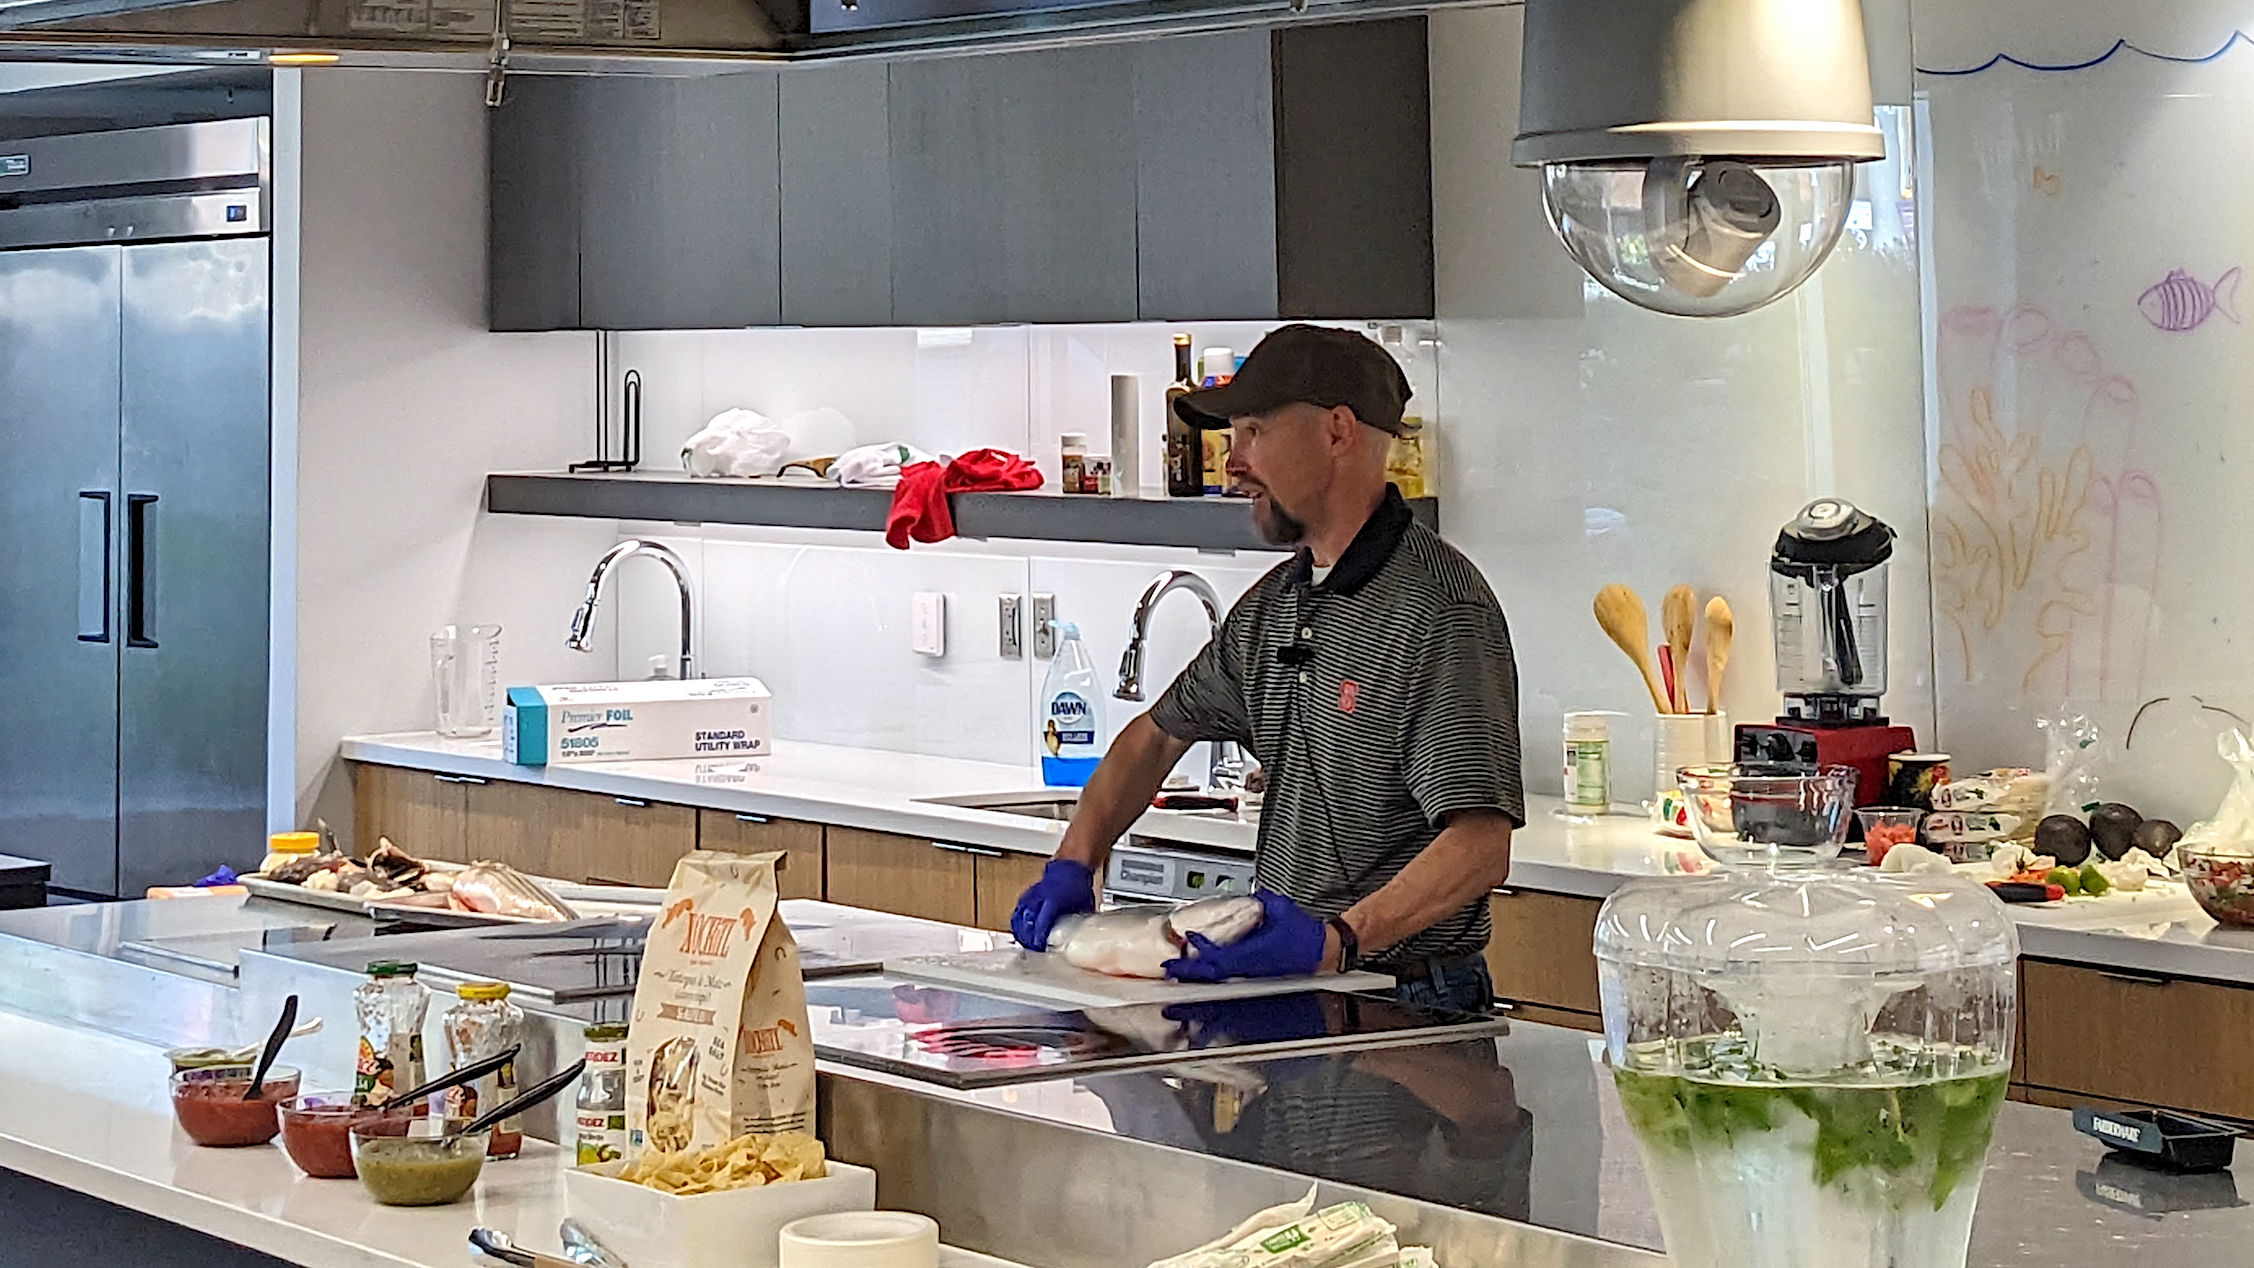 Bolton prepares a meal featuring local bluefish.